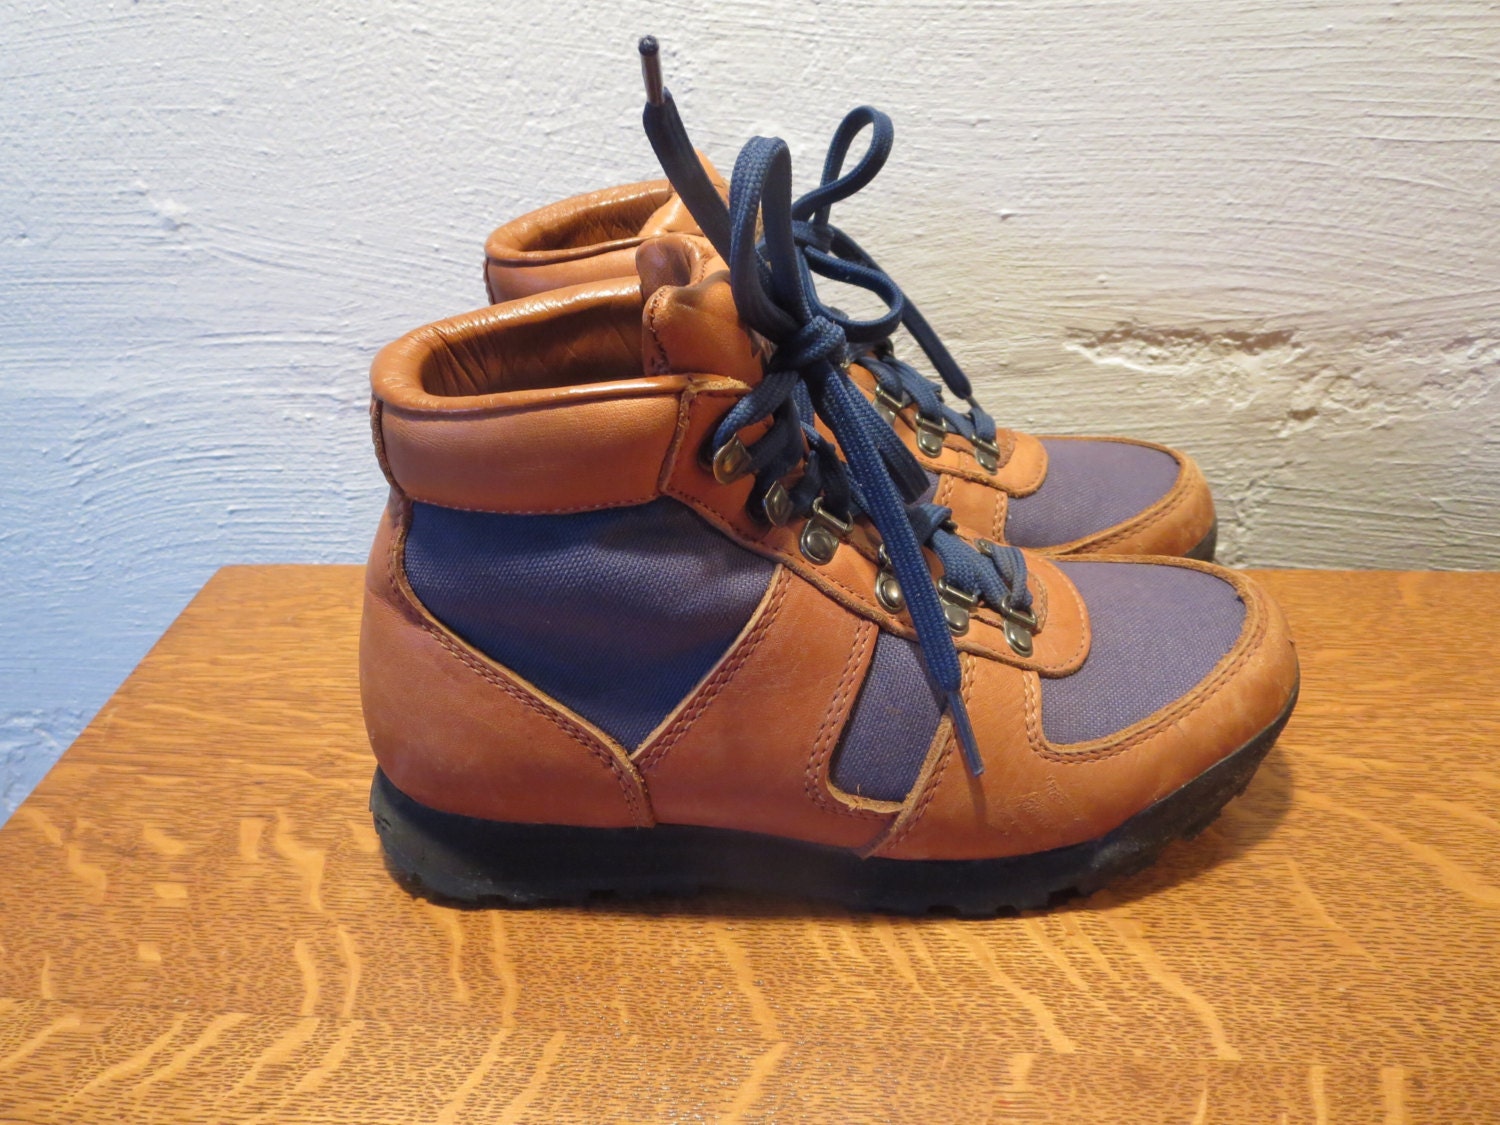 Vintage REI Hiking Boots Womens 7.5 Hiking Boots Gortex